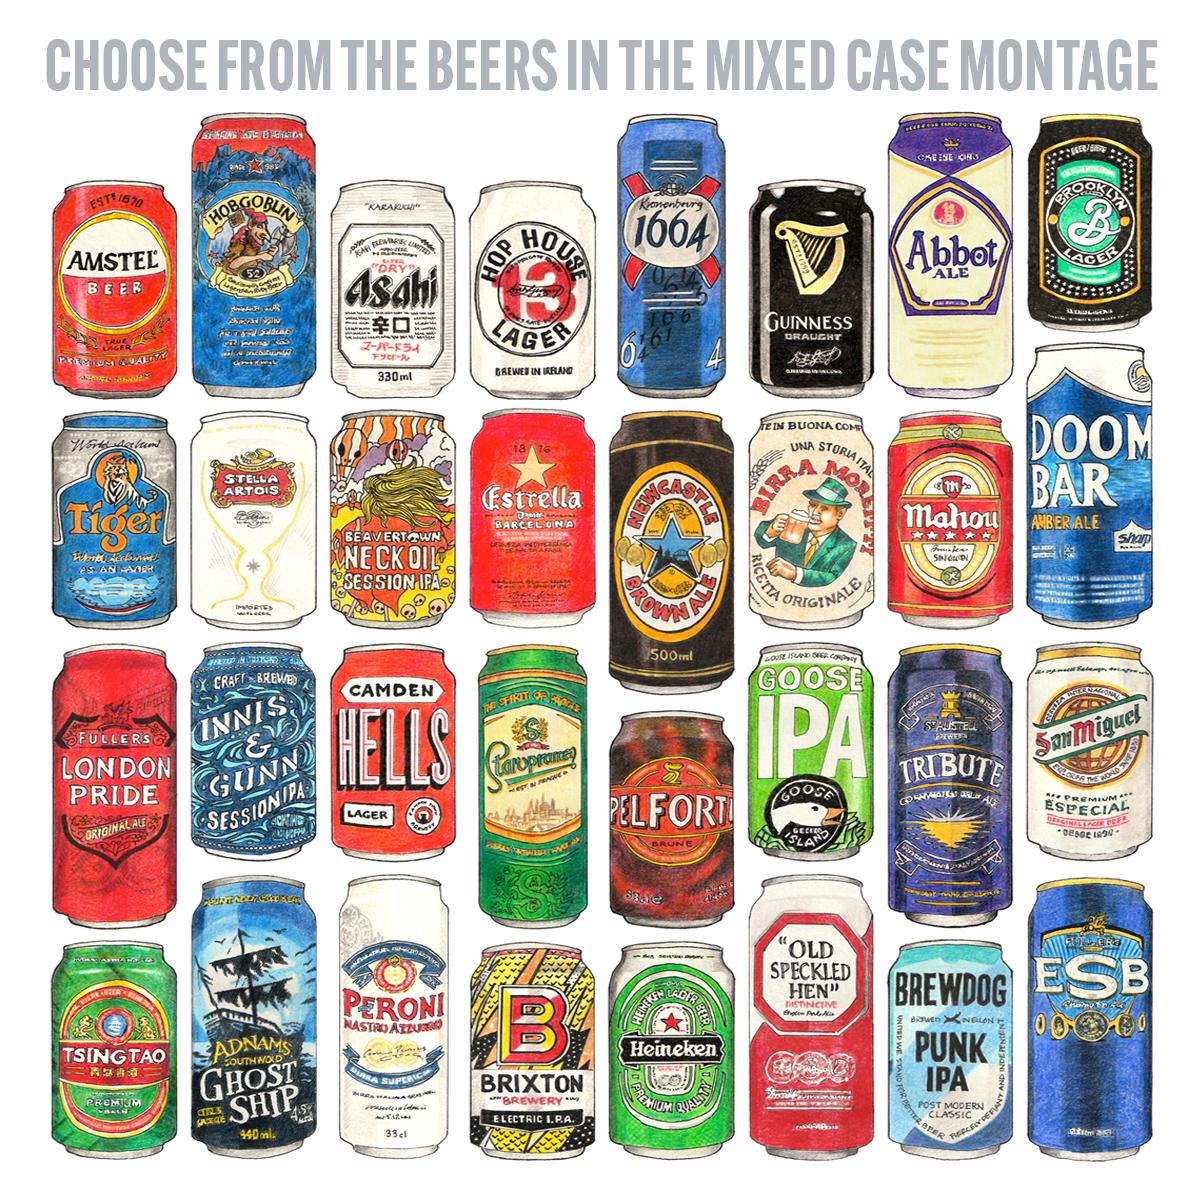 Select from Mixed Case